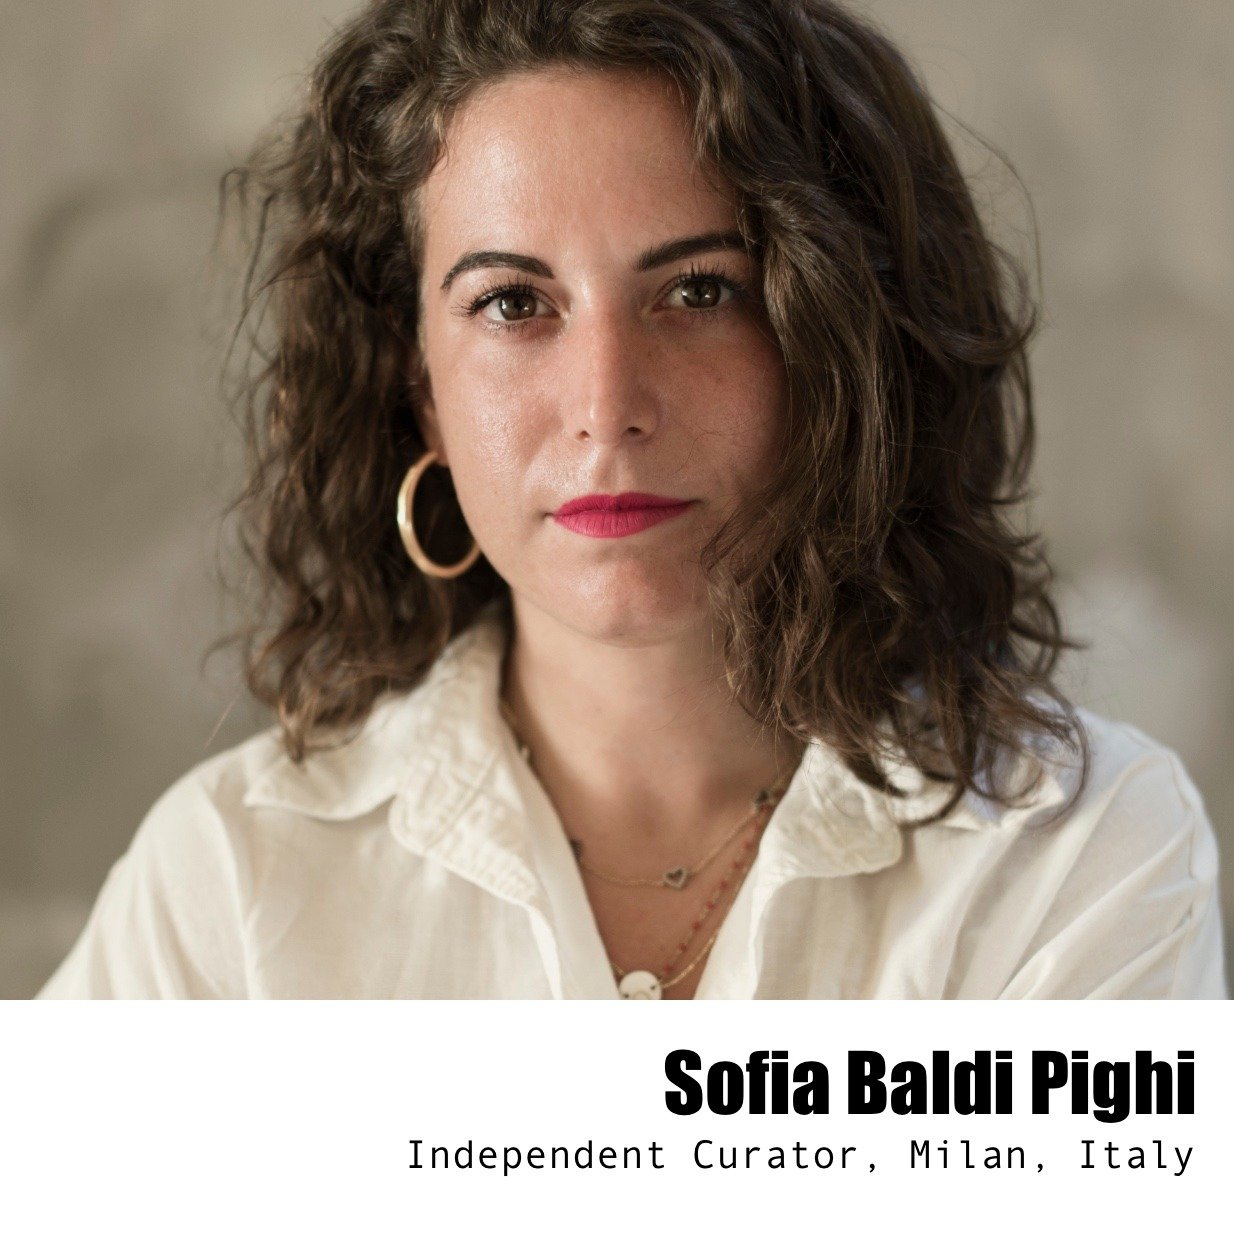 Meet new IKT Member: Sofia Baldi Pighi @sofiabaldipighi

Sofia is an Italian curator based in Milan and Malta. Since 2017, she has organised contemporary art exhibitions, public programs, and ad hoc art therapy workshops for several public and privat